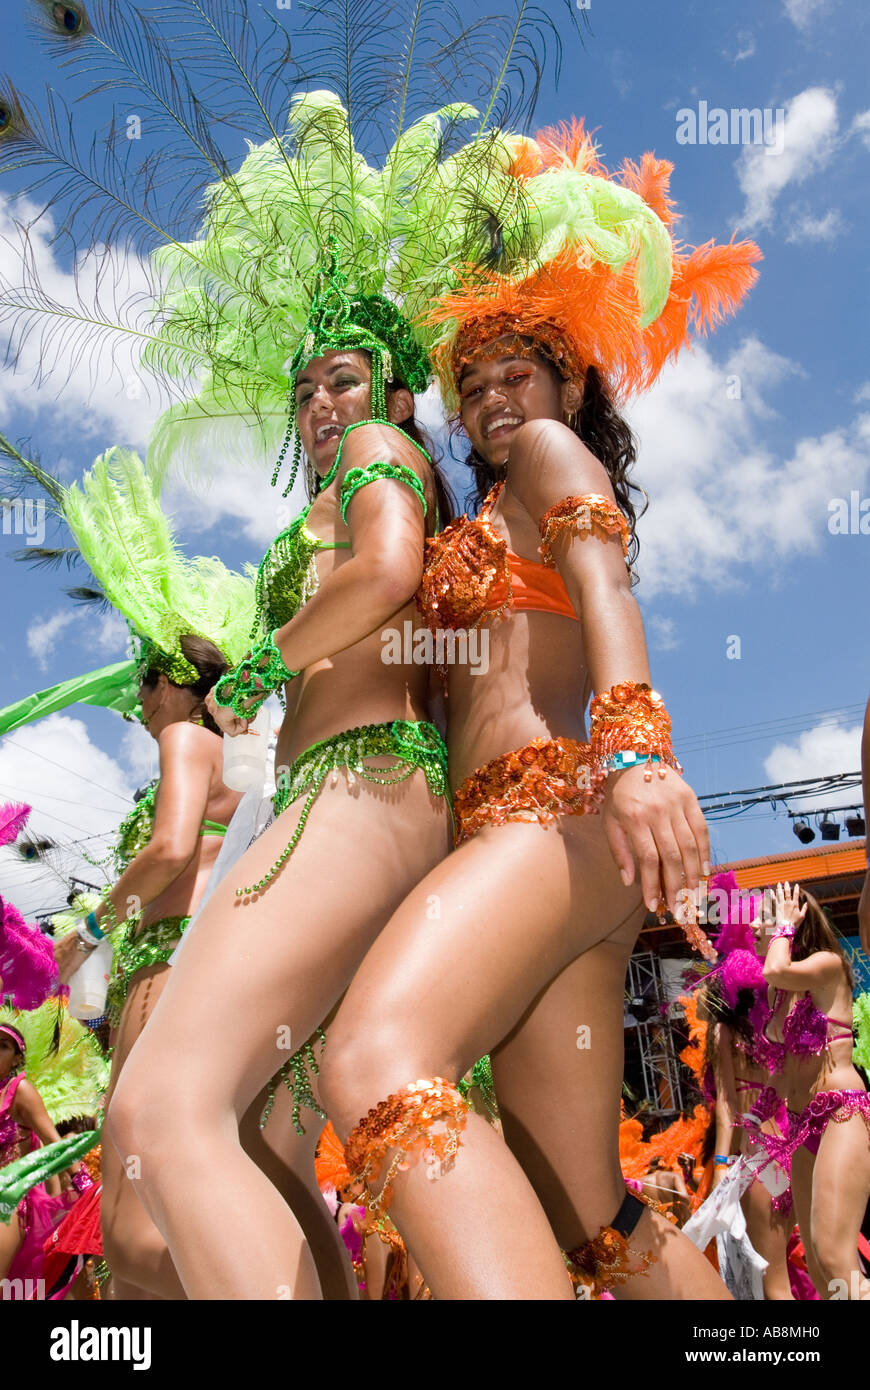 West Indies Port of Spain Trinidad Carnival Costumed women dancers on mainstage in colorful costumes. Stock Photo